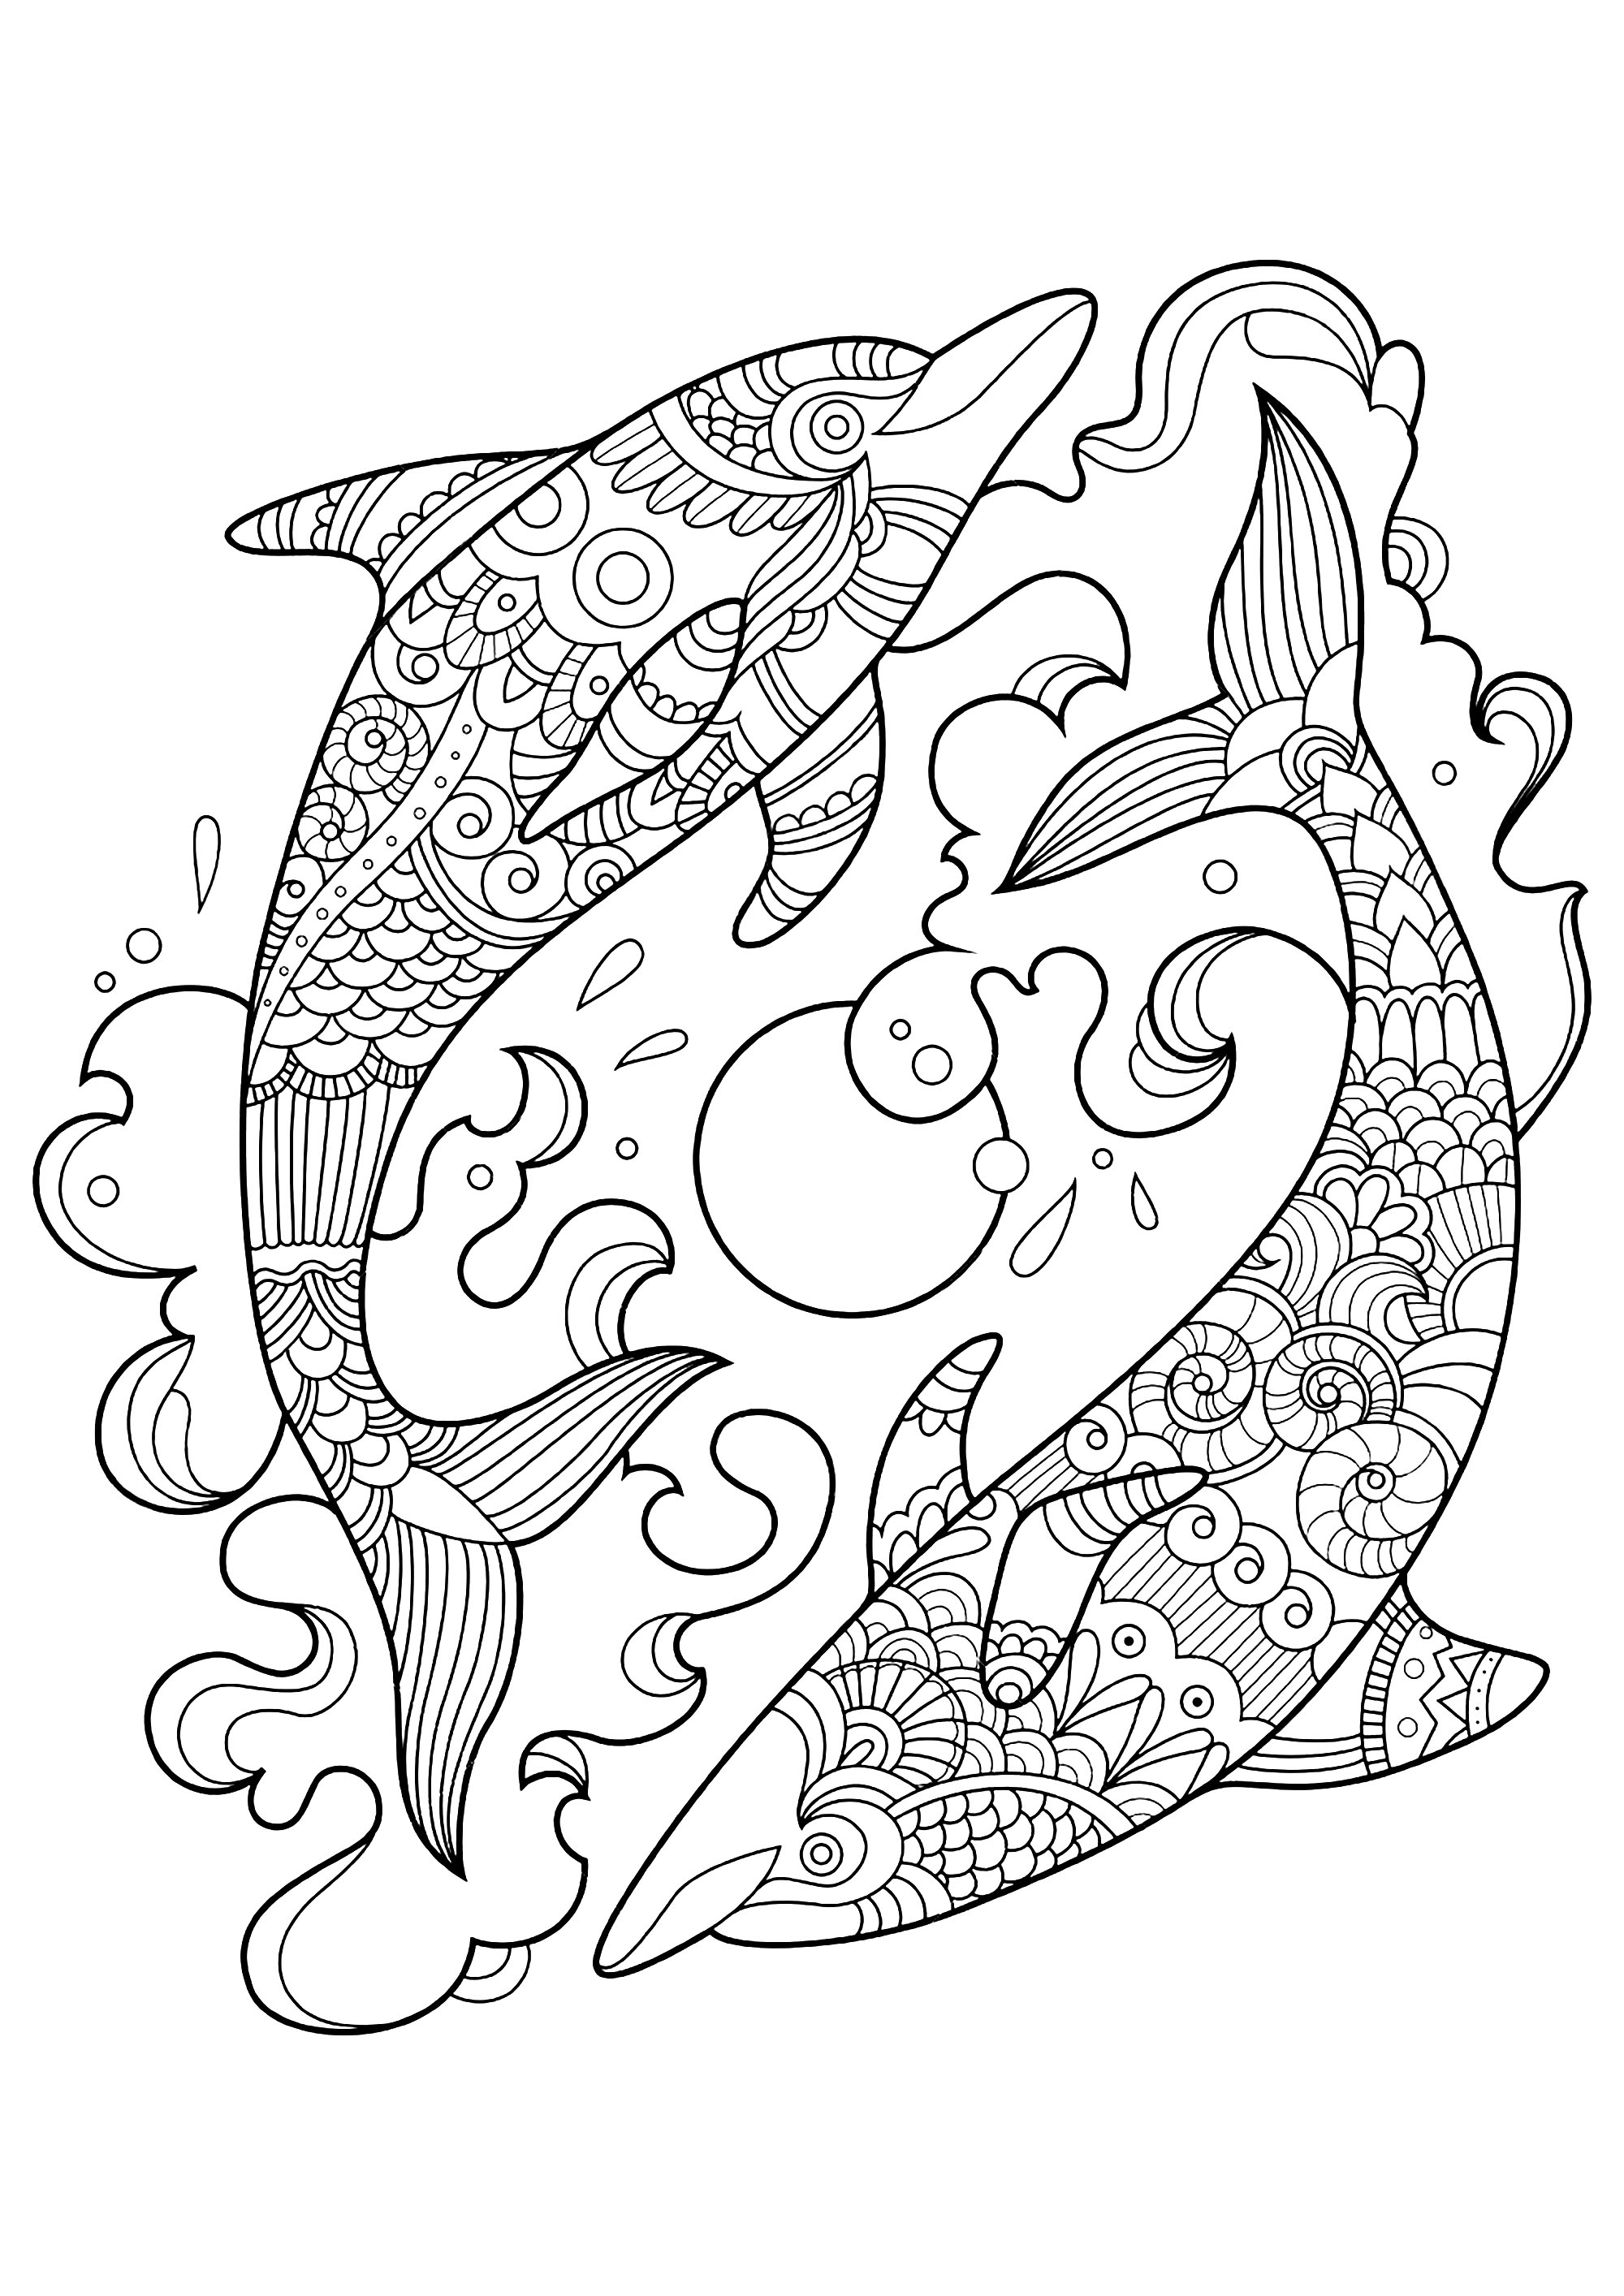 dolphin coloring printables easy dolphin drawing at getdrawingscom free for coloring dolphin printables 